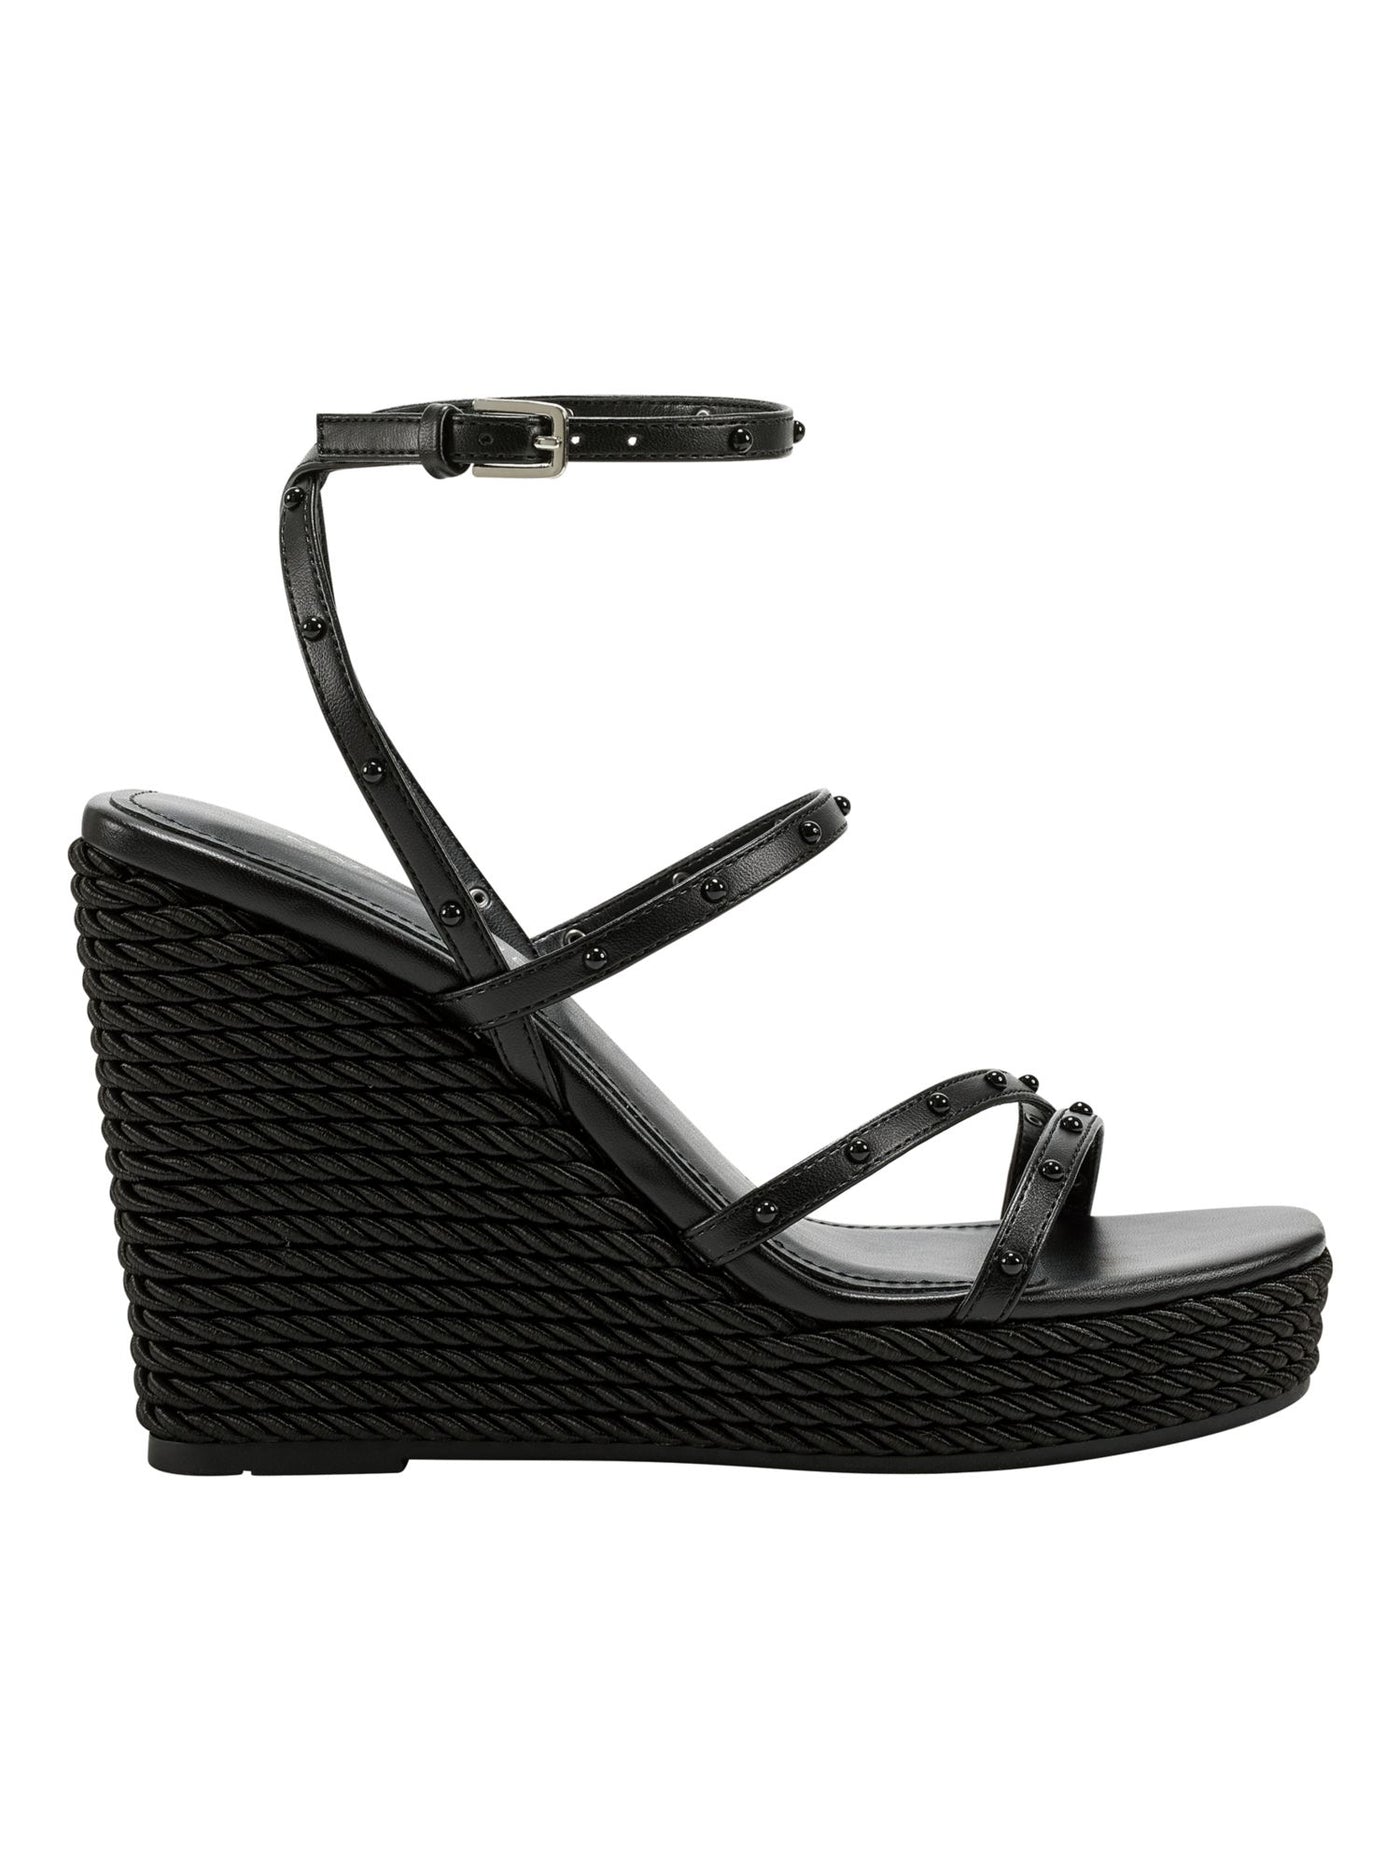 MARC FISHER Womens Black Strappy Studded Zig Square Toe Wedge Buckle Heeled Sandal 9.5 M